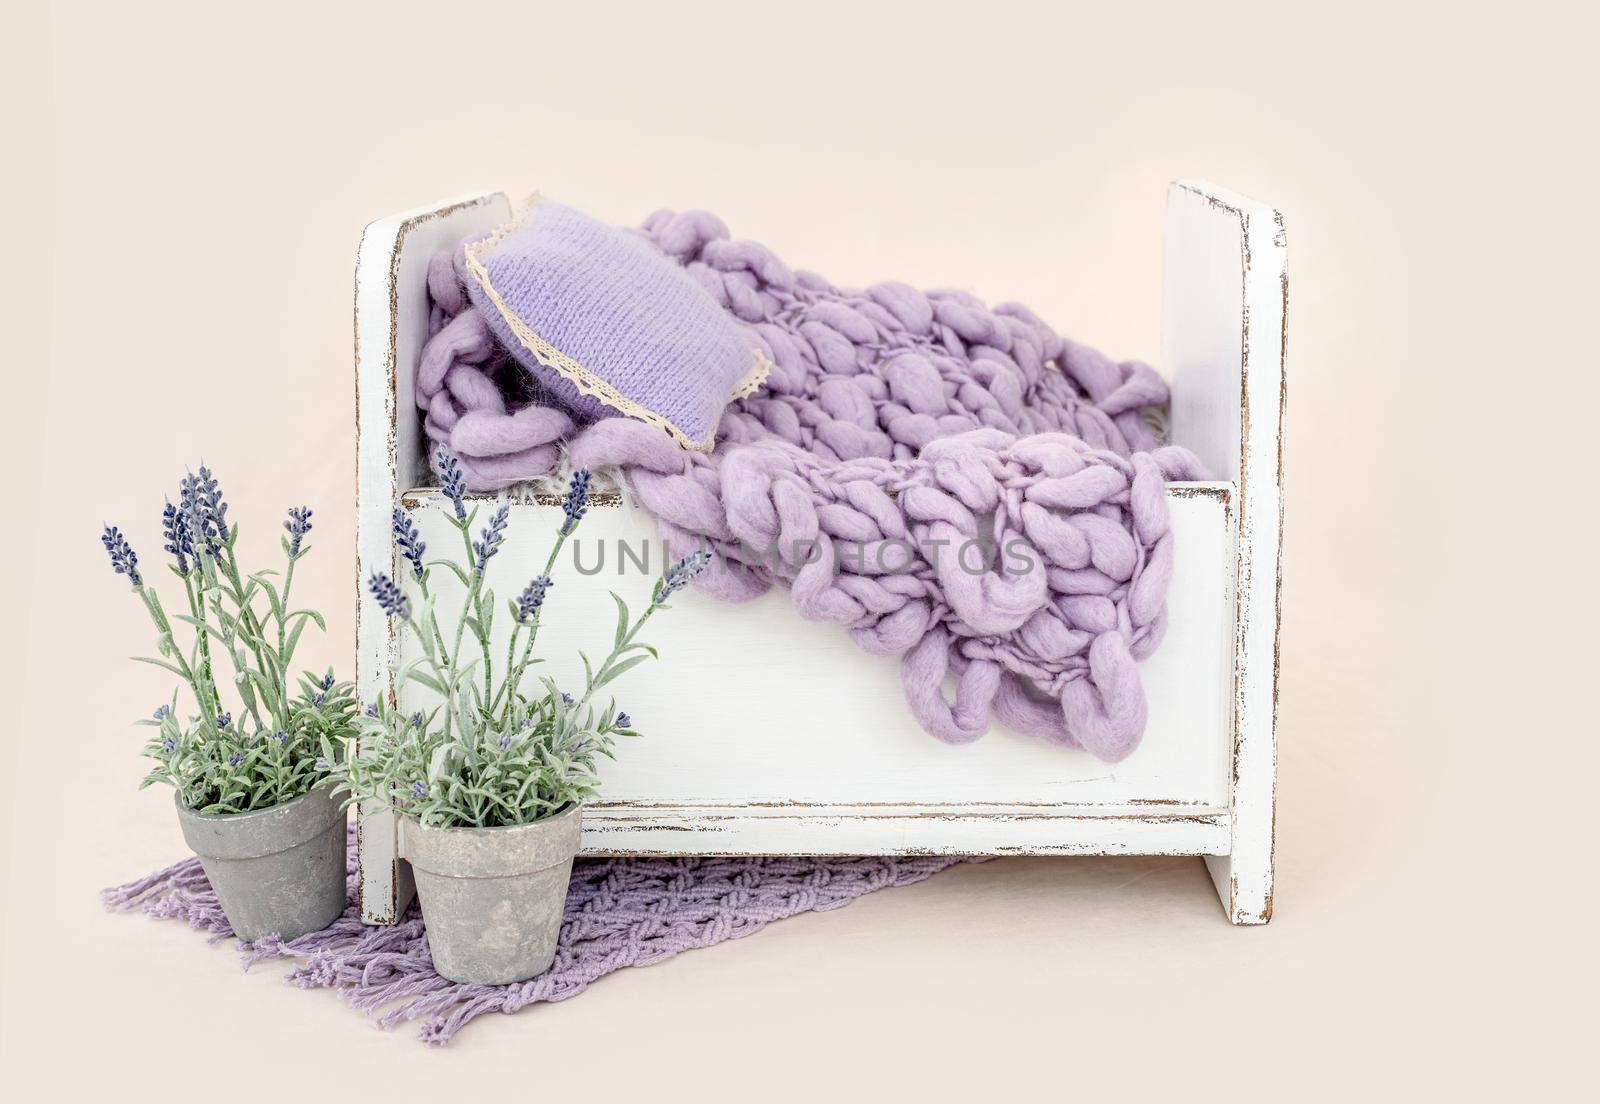 Beautiful white wooden bed furniture for newborn studio photoshoot with purple flowers decoration, pillow and knitted blanket. Tiny designed place for infant photo isolated on light pink background